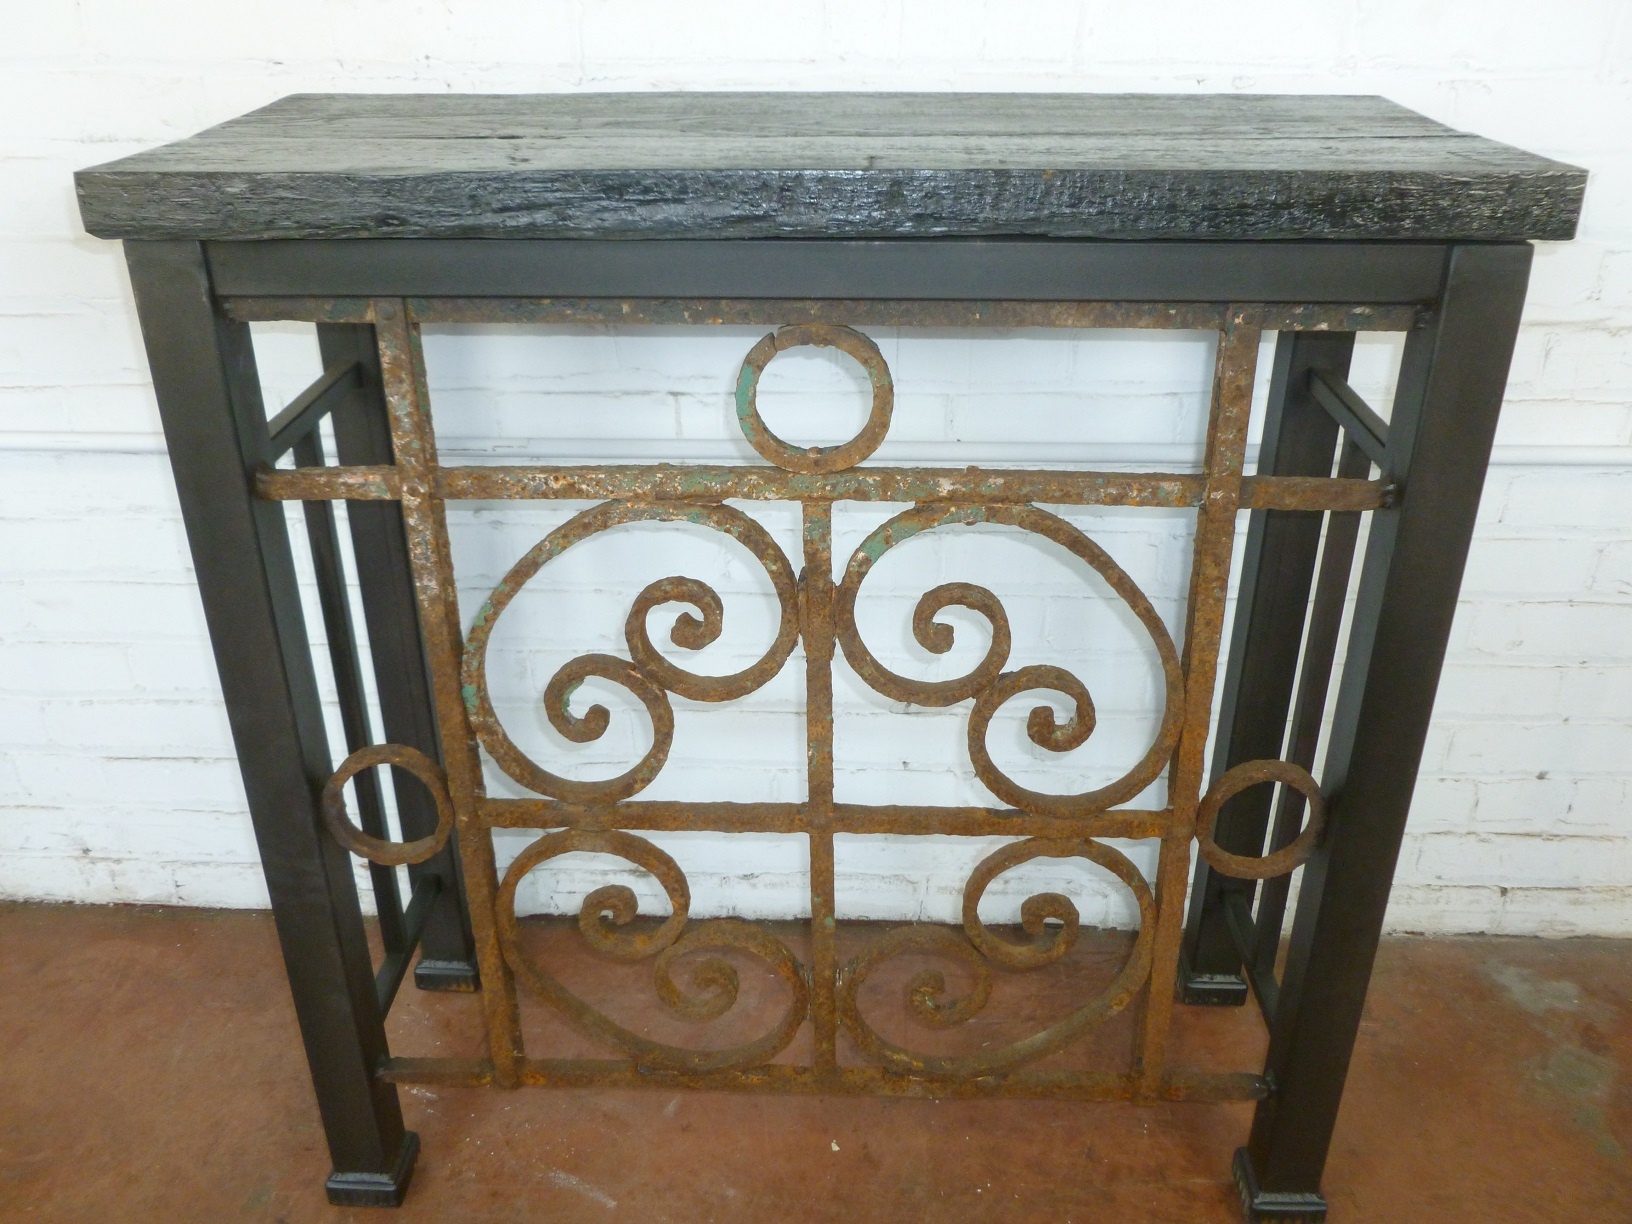 Custom iron console table by Ferro Designs LLC with a barnwood top and a dark iron base finish.